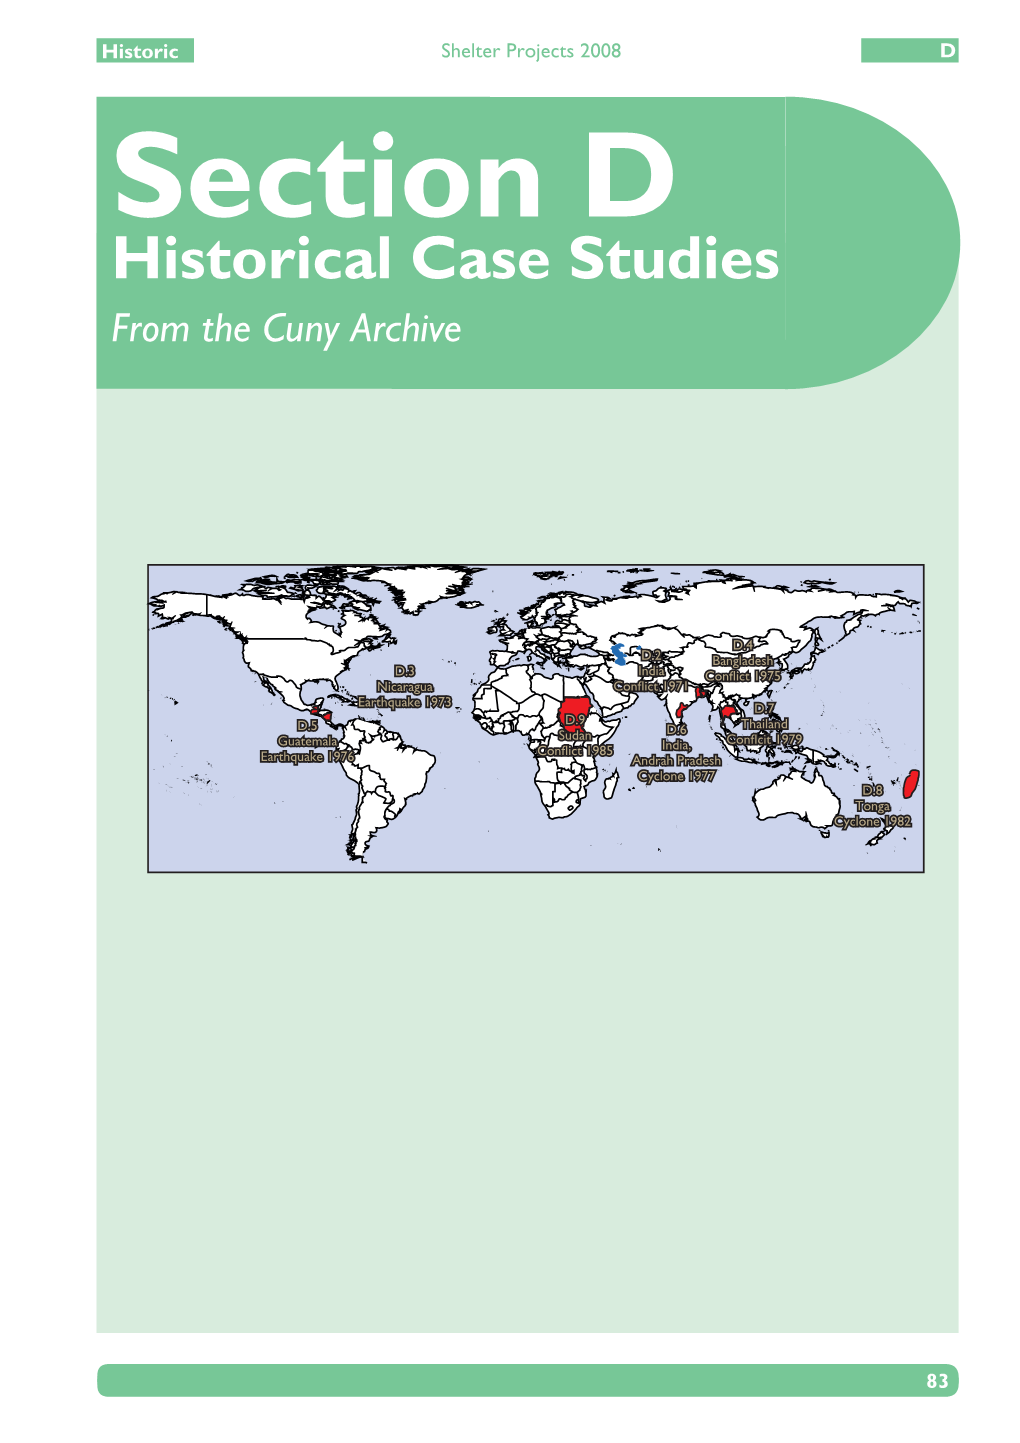 Historical Case Studies from the Cuny Archive